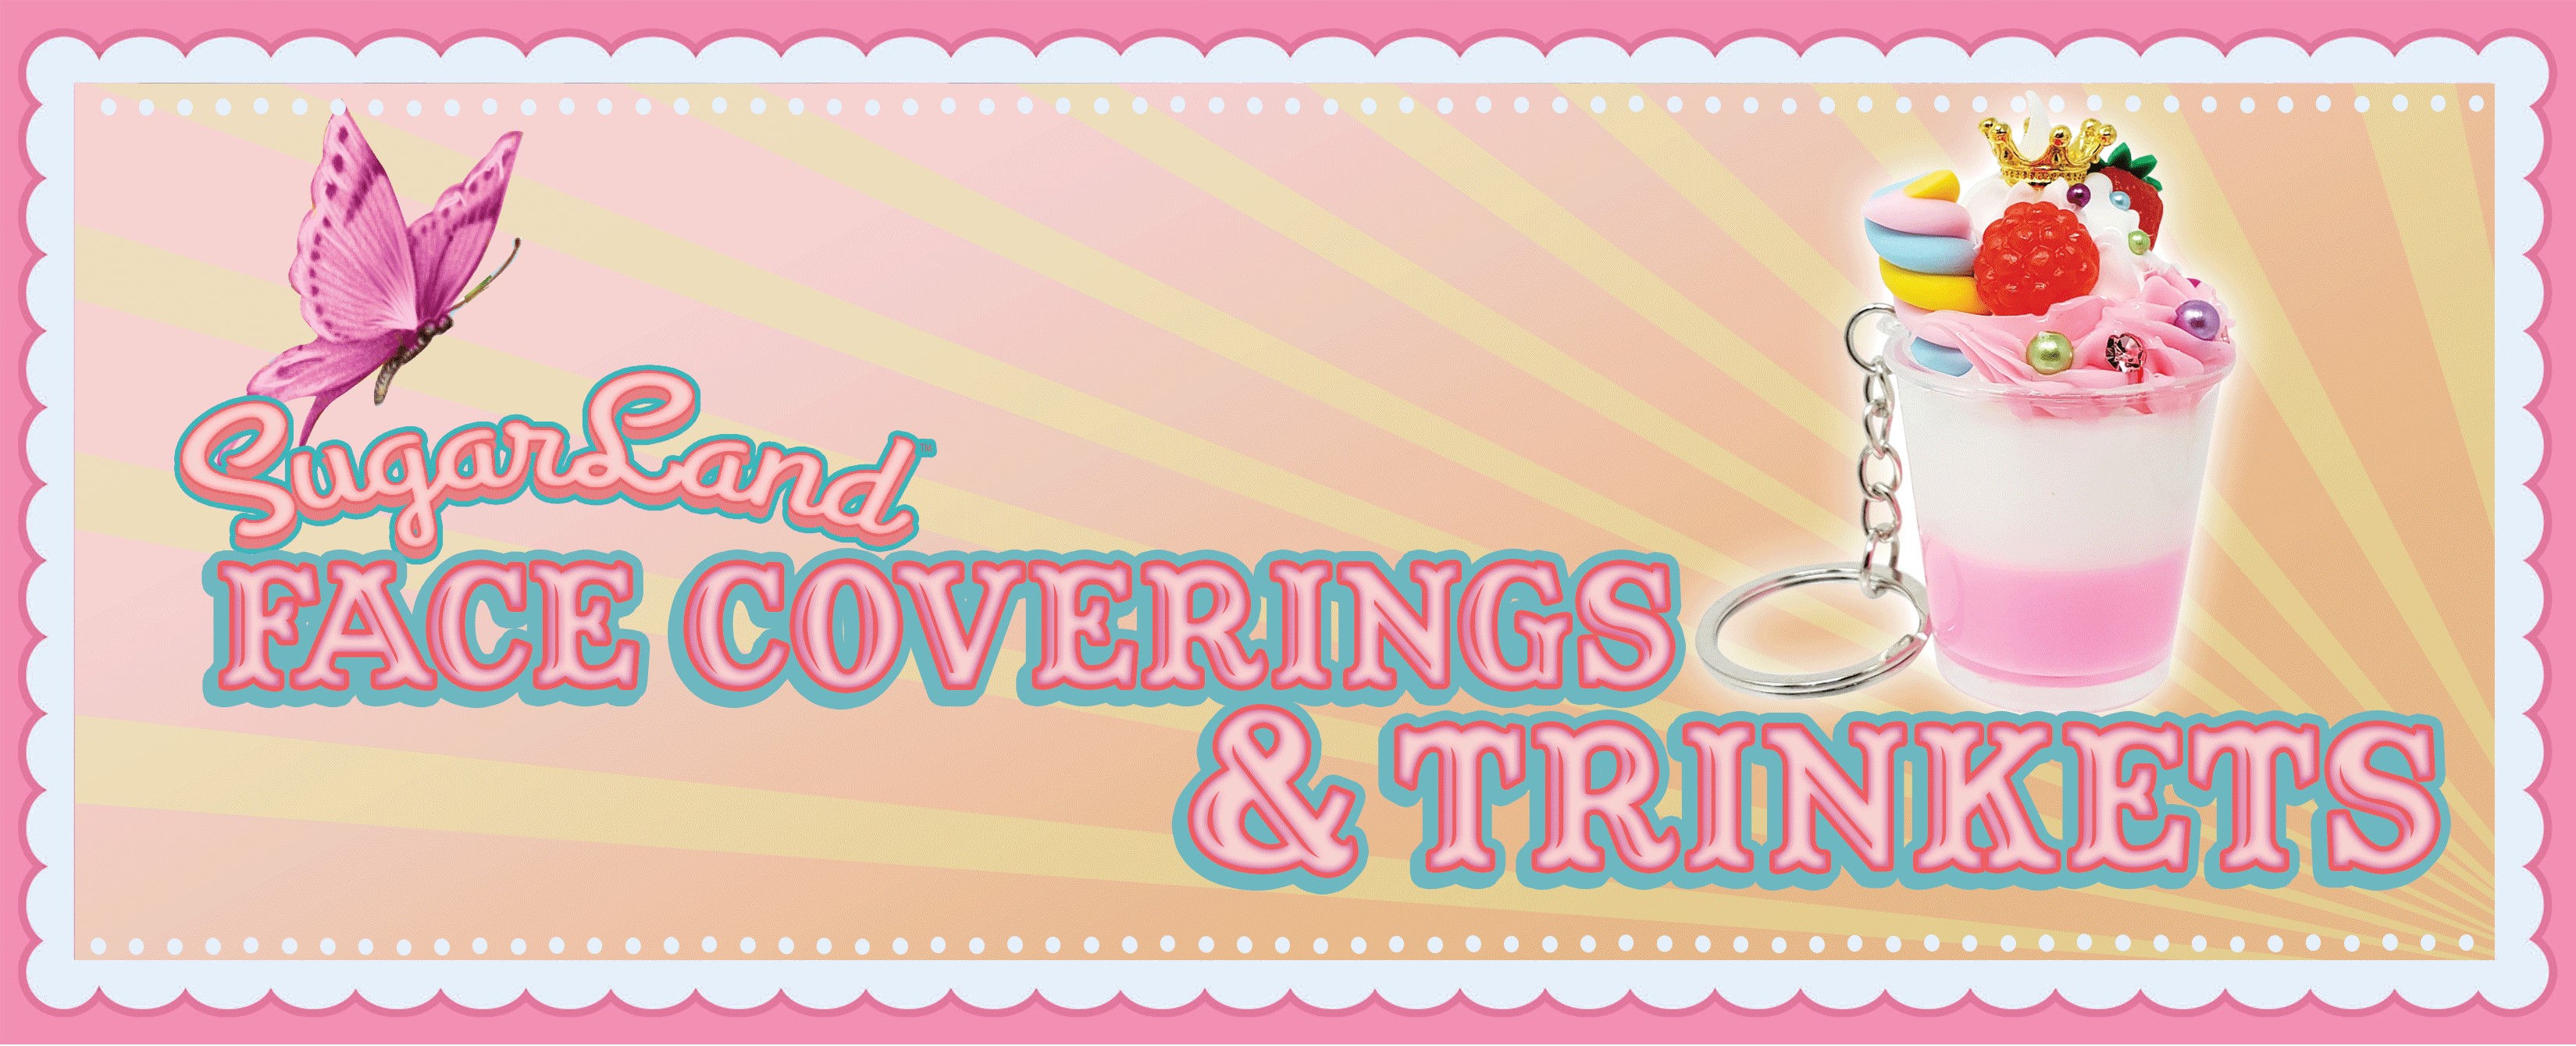 face-coverings-and-trinkets-header.jpg